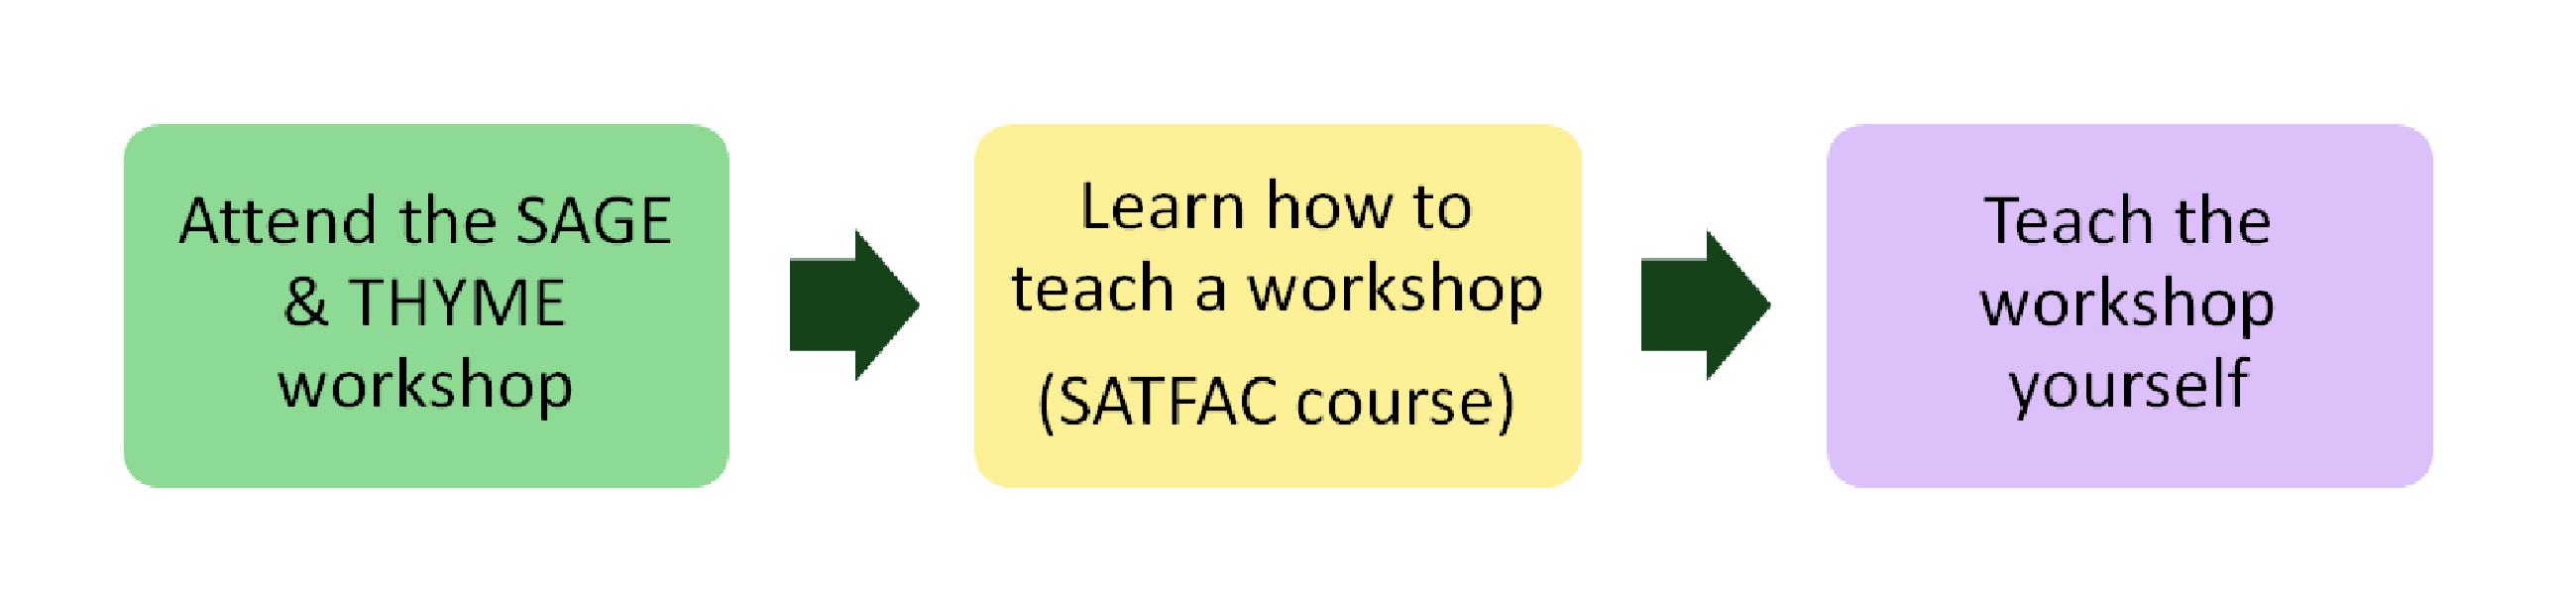 Attend a workshop, learn how to teach it, then teach the workshop yourself